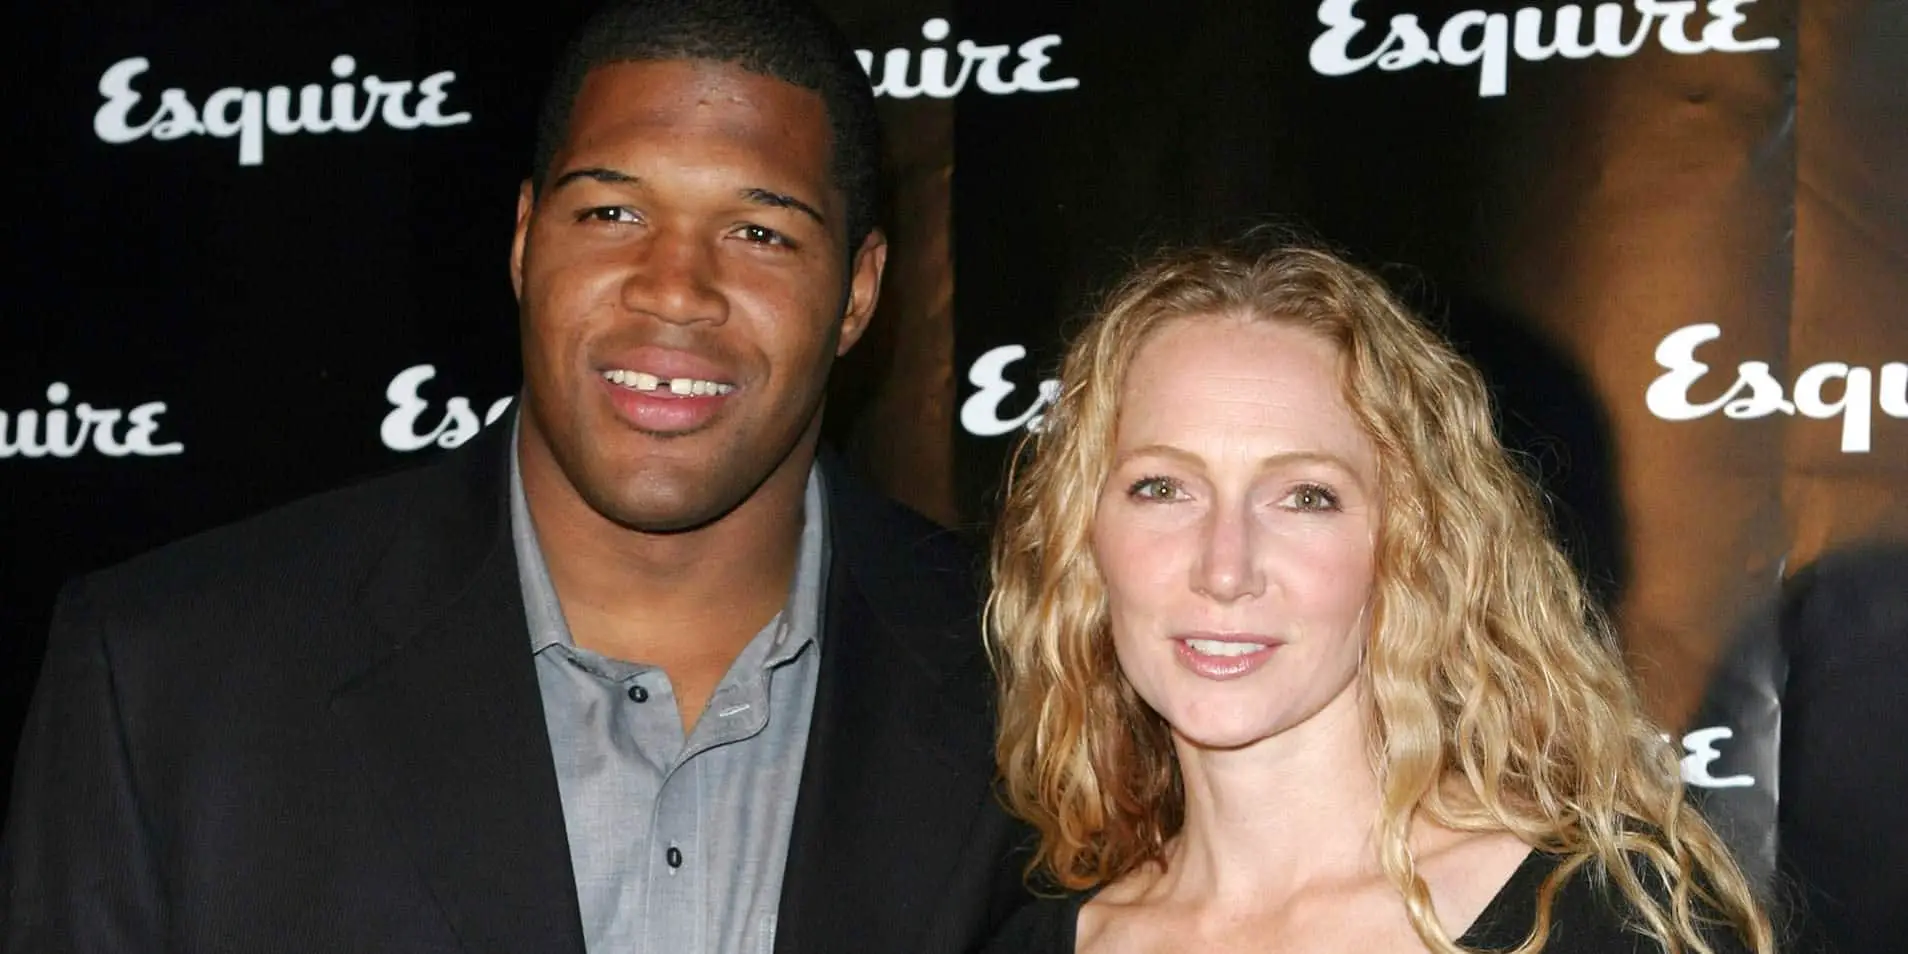 Michael Strahan Biography: Age, Height, Career, Family, Personal Life, Net Worth